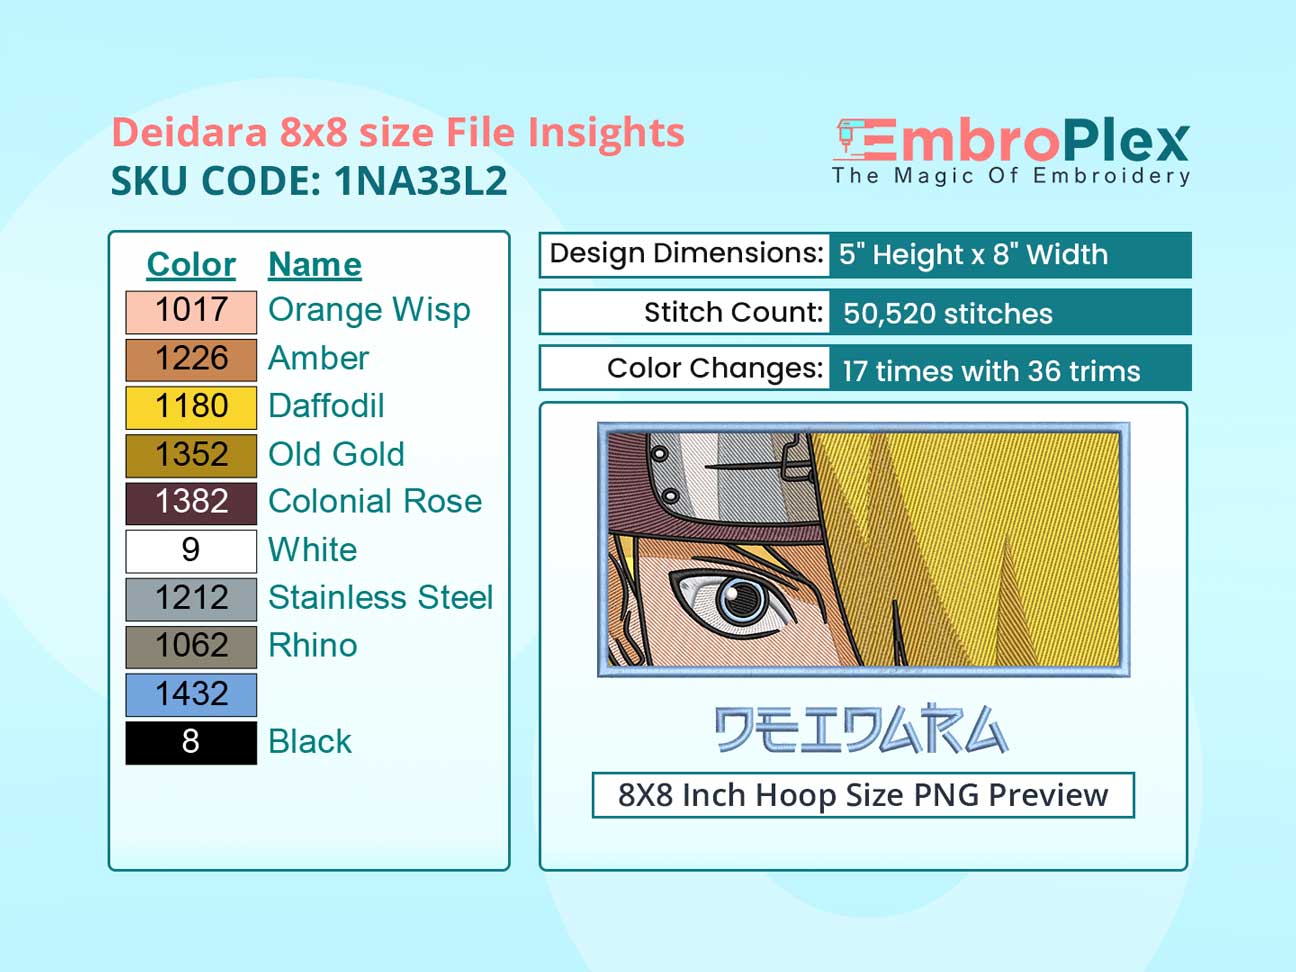 Anime-Inspired Deidara Embroidery Design File - 8x8 Inch hoop Size Variation overview image